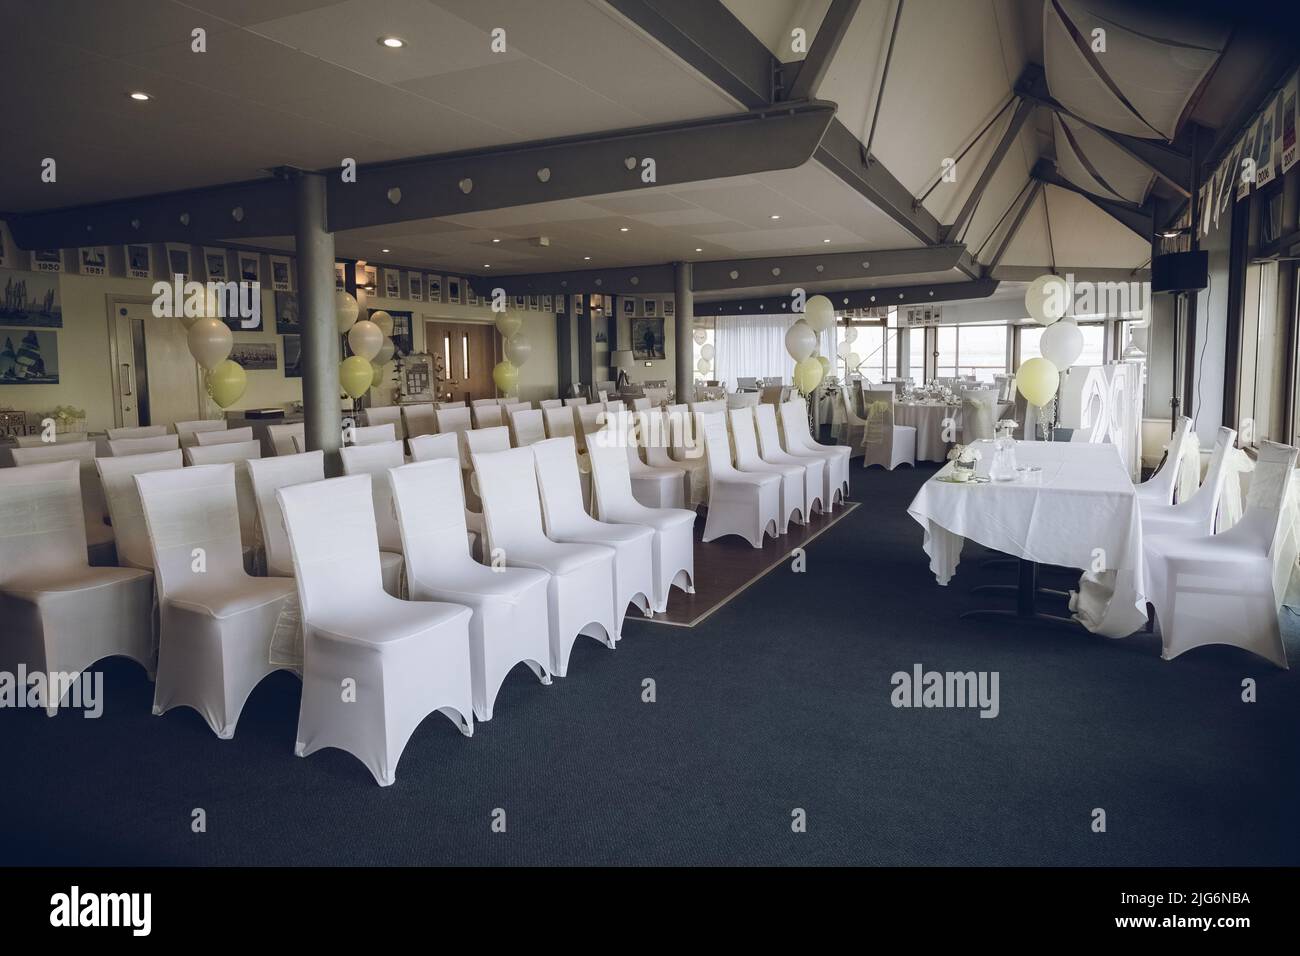 A wedding venue set out before quests arrive with white chairs and yellow decorations Stock Photo